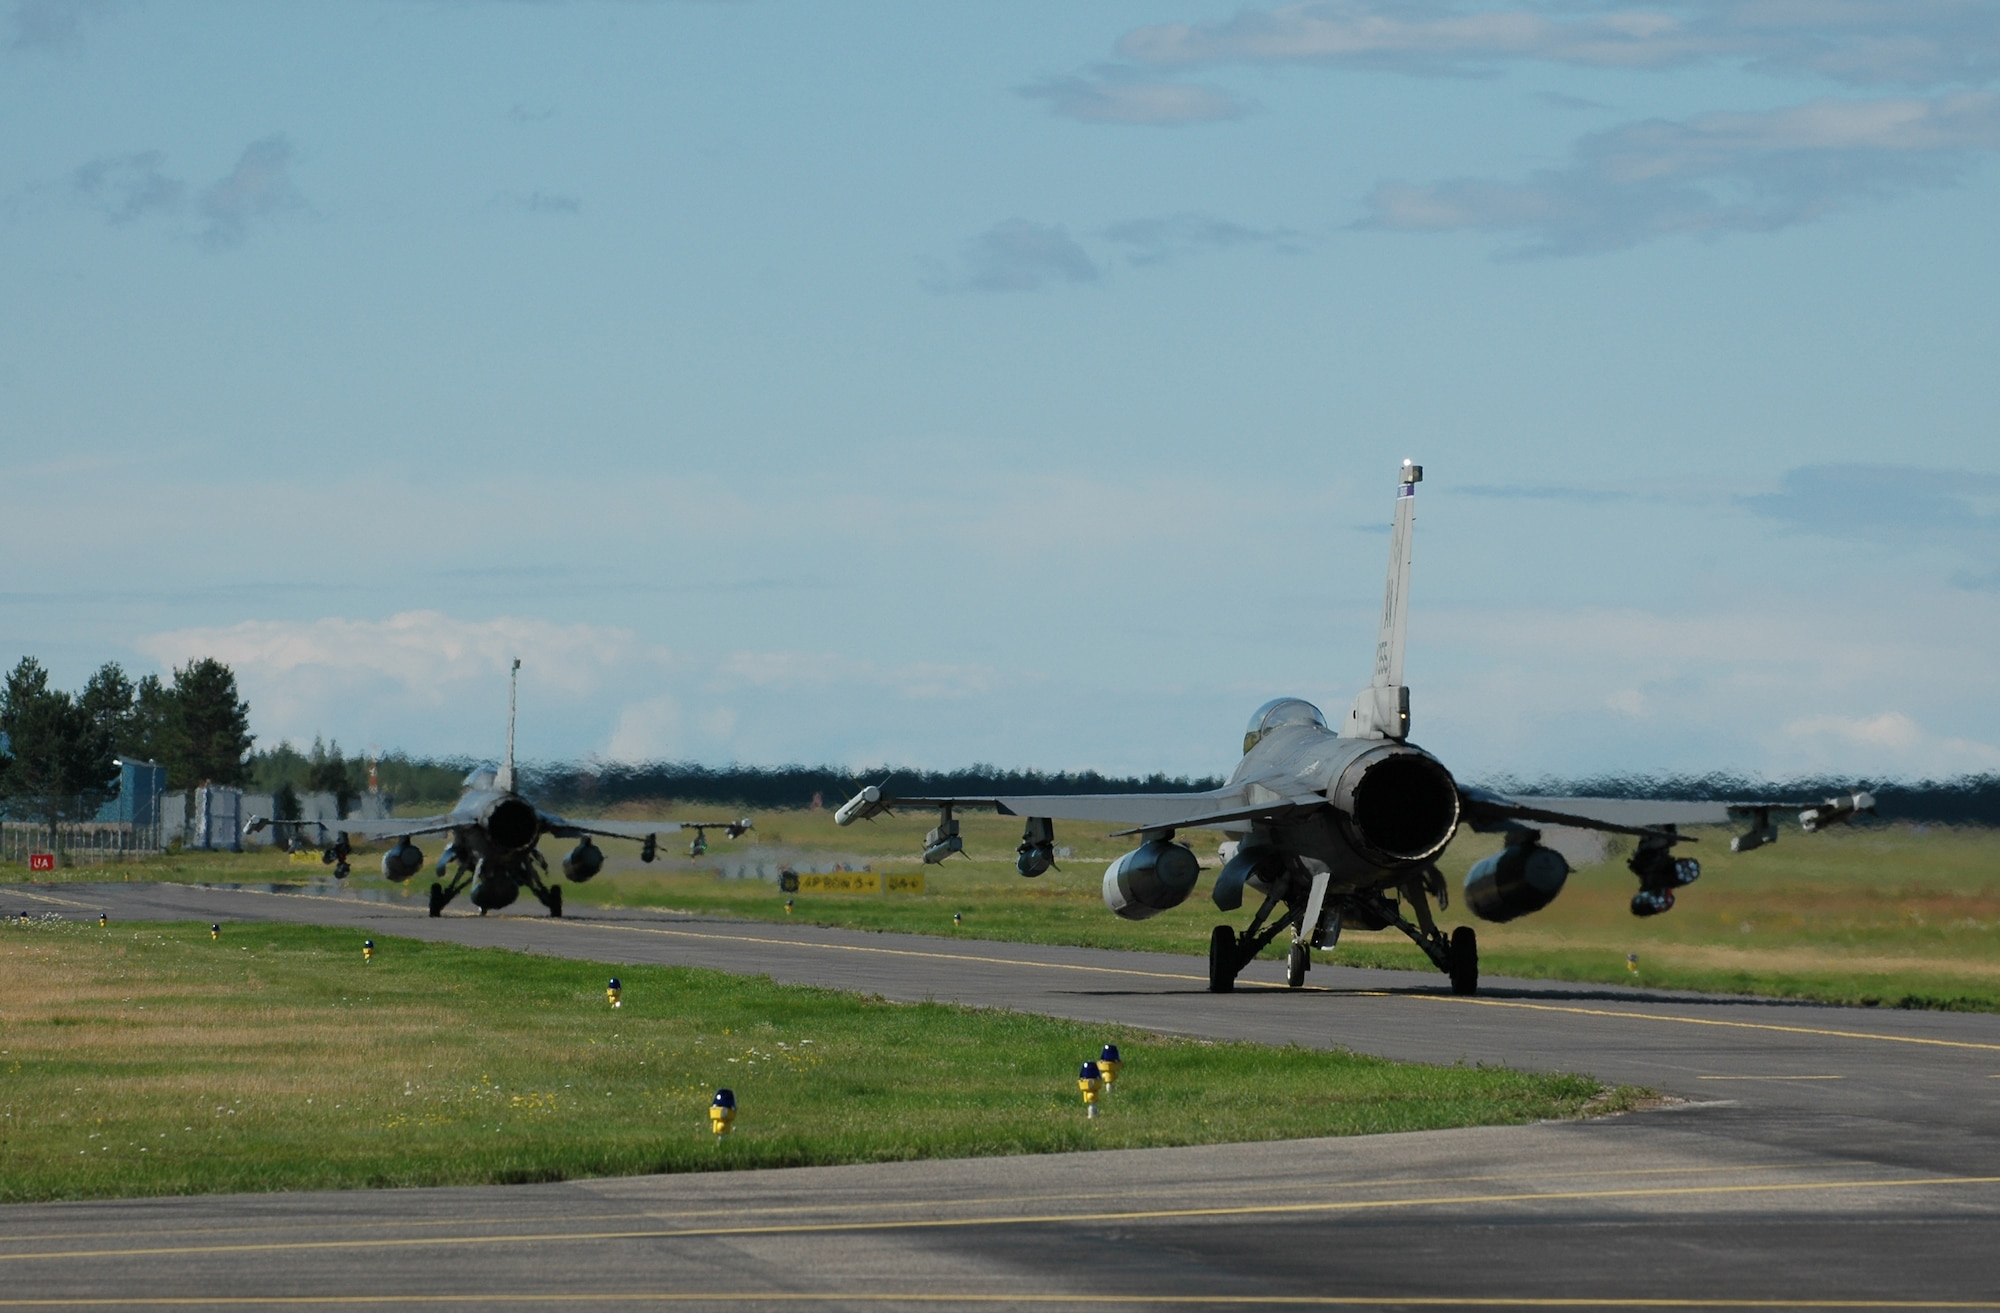 Two F-16s taxi out onto the runway for an air-to-ground training mission Aug. 5, 2010 at Kallax Air Base, Sweden. More than 250 men and women from the 555th Fighter Squadron and 31st Aircraft Maintenance Squadron traveled to the Swedish air base on July 30, 2010 for a two week exercise conducting air-to-air and air-to-ground flying missions with Norrbotten Wing. (U.S. Air Force photo by Tech. Sgt. Lindsey Maurice/Released)